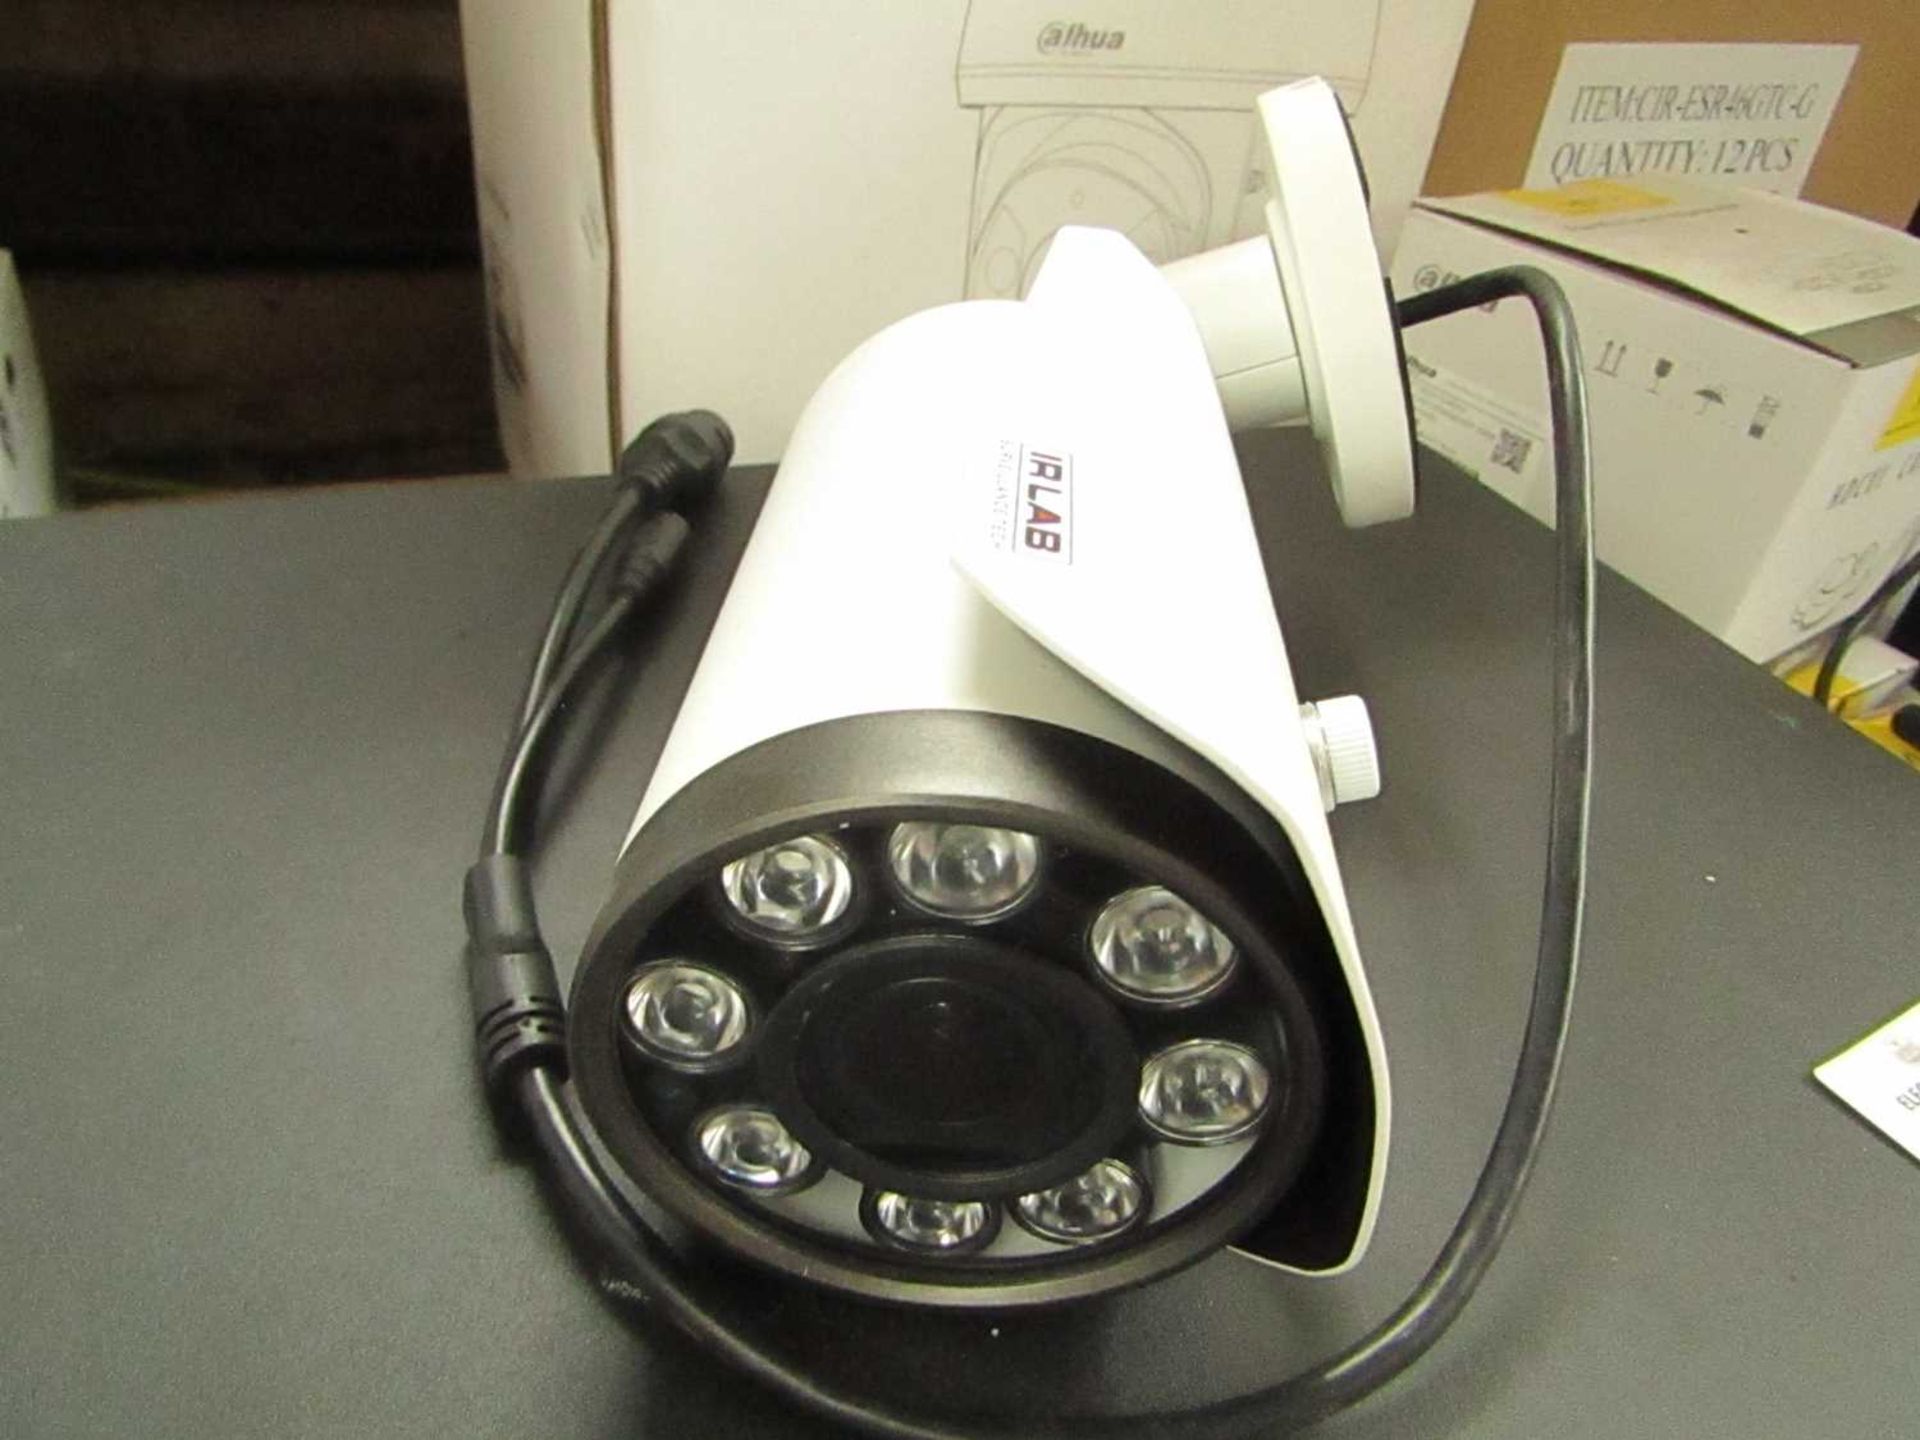 VAT IRLAB CIR-HDR26NEC IR Network Camera. Tested working and boxed.